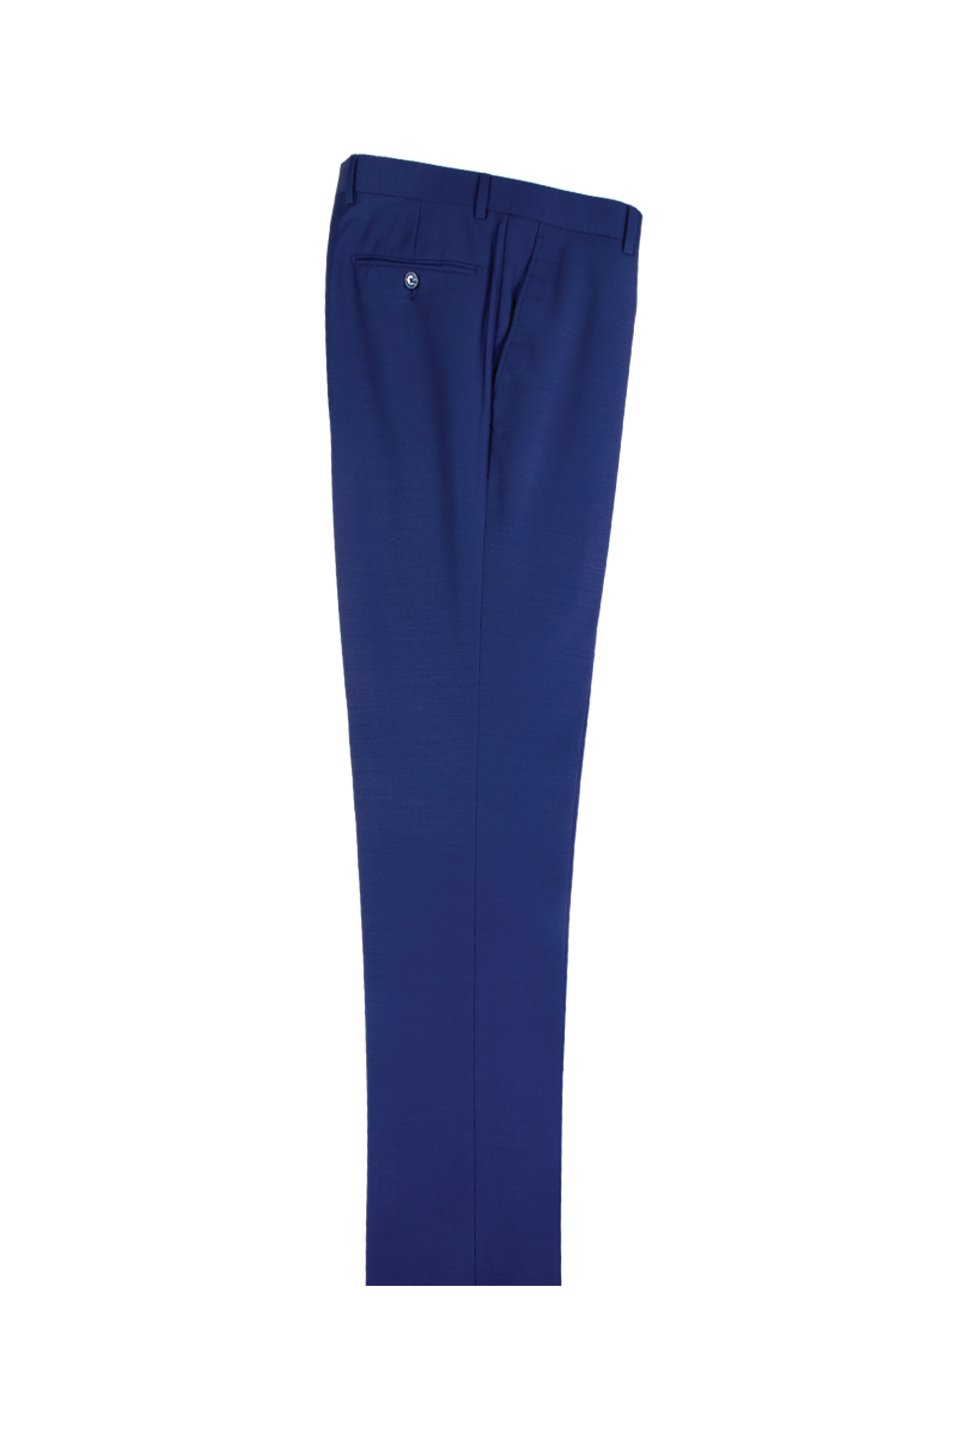 Tiglio Tiglio French Blue Solid Flat Front Slim Fit Dress Pants